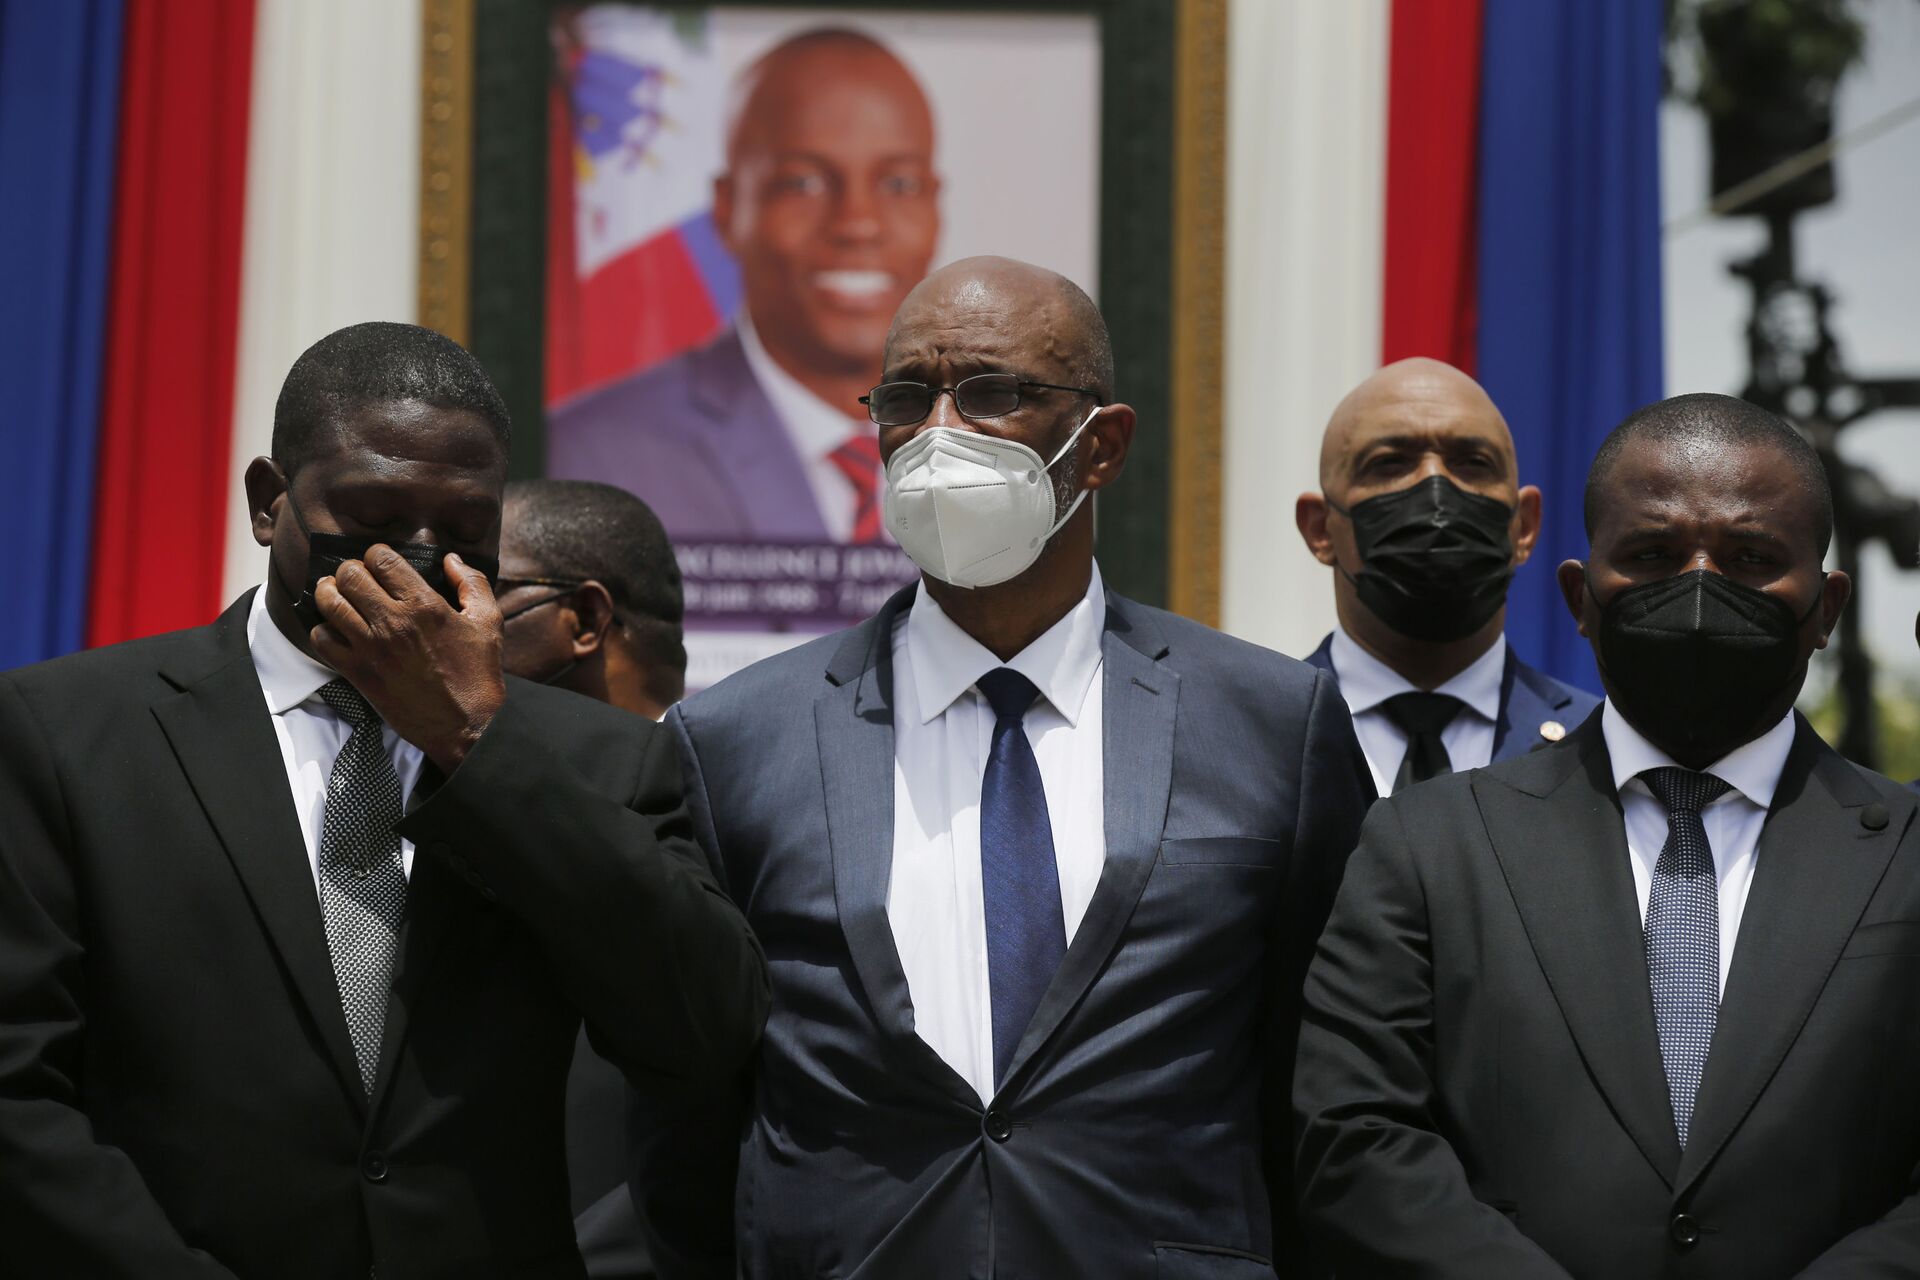 Haiti's designated Prime Minister Ariel Henry, center, and interim Prime Minister Claude Joseph, right, pose for a group photo with other authorities in front of a portrait of late Haitian President Jovenel Moise at at the National Pantheon Museum during a memorial service in Port-au-Prince, Haiti, Tuesday, July 20, 2021. - Sputnik International, 1920, 07.09.2021